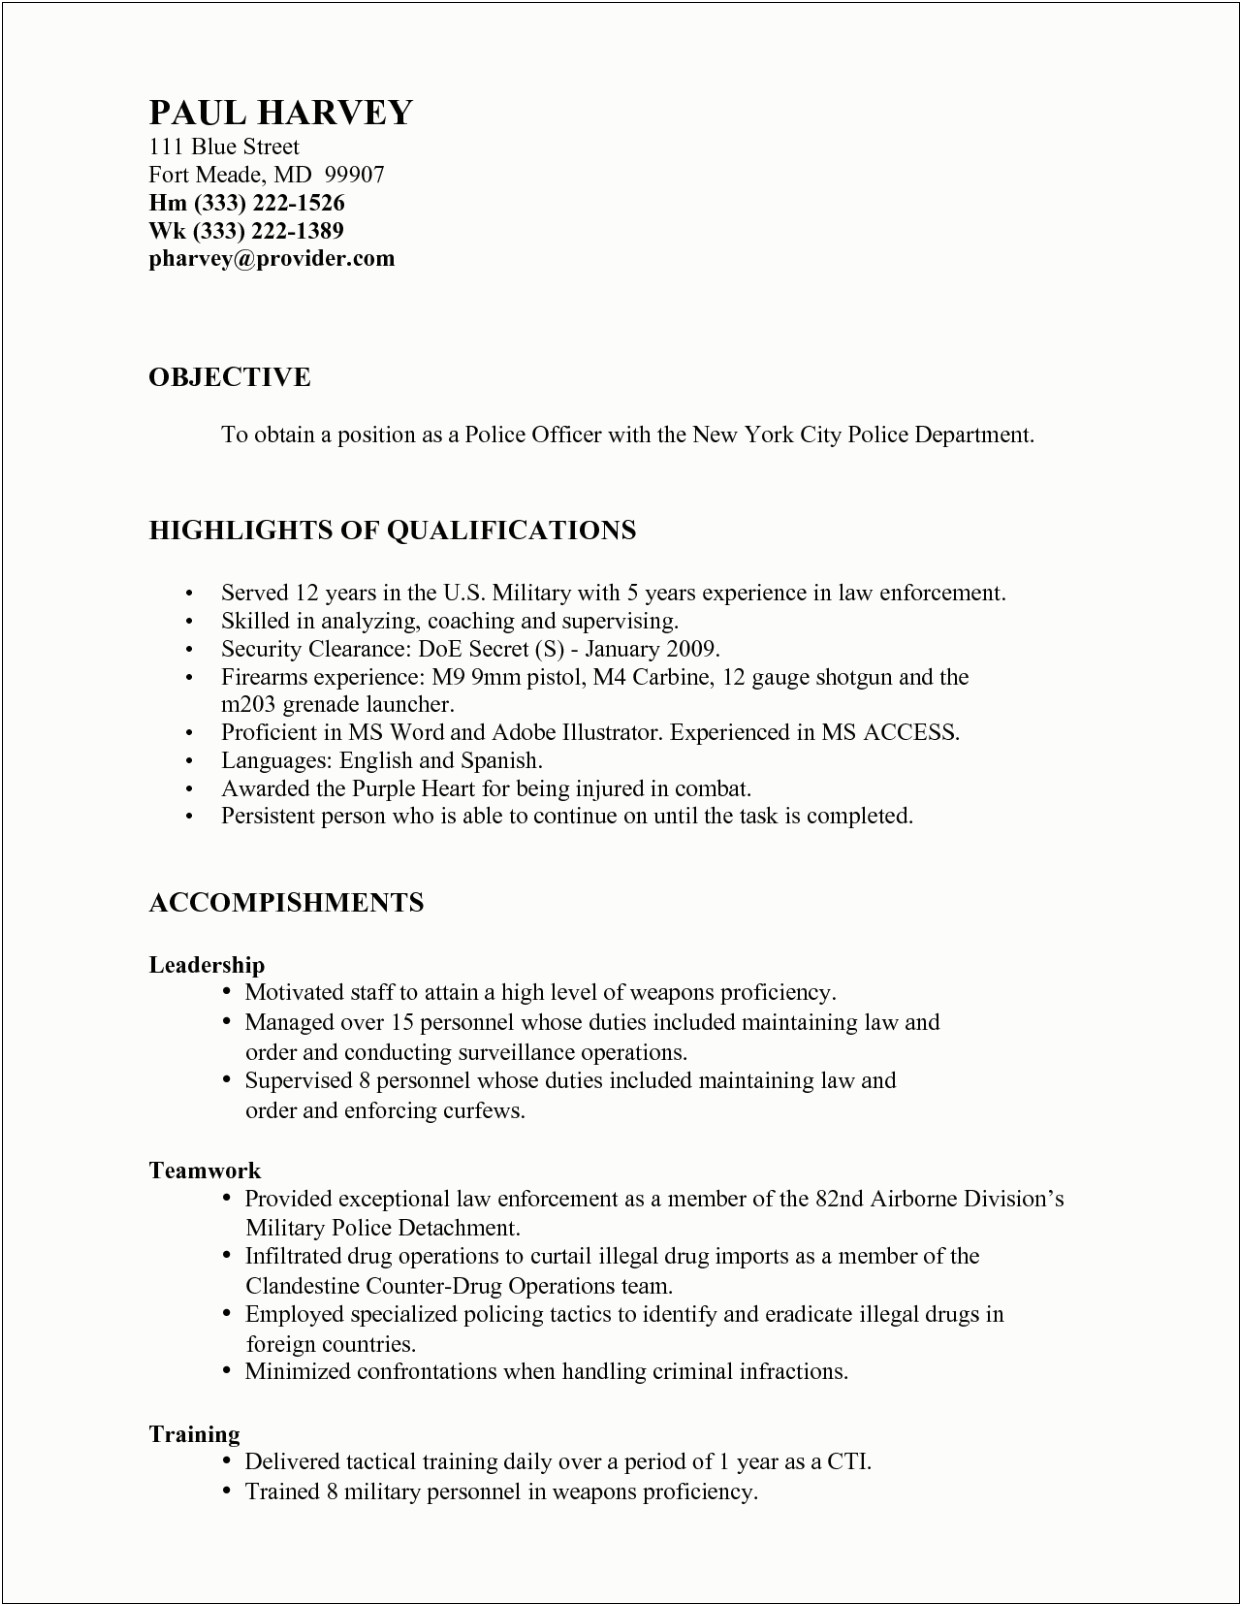 Resume Objective For Public Safety